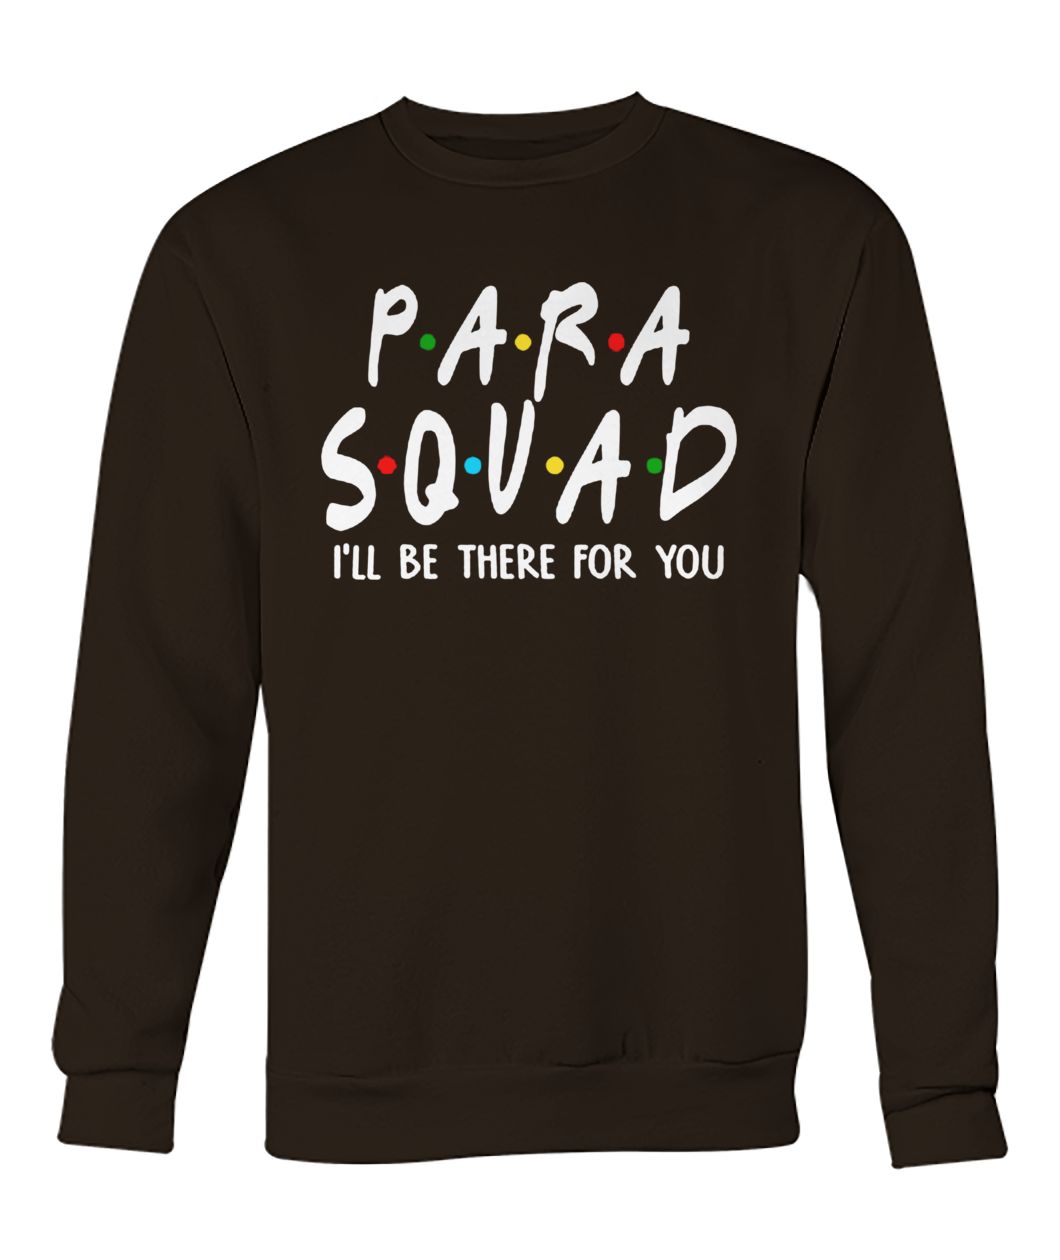 Para squad I'll be there for you crew neck sweatshirt